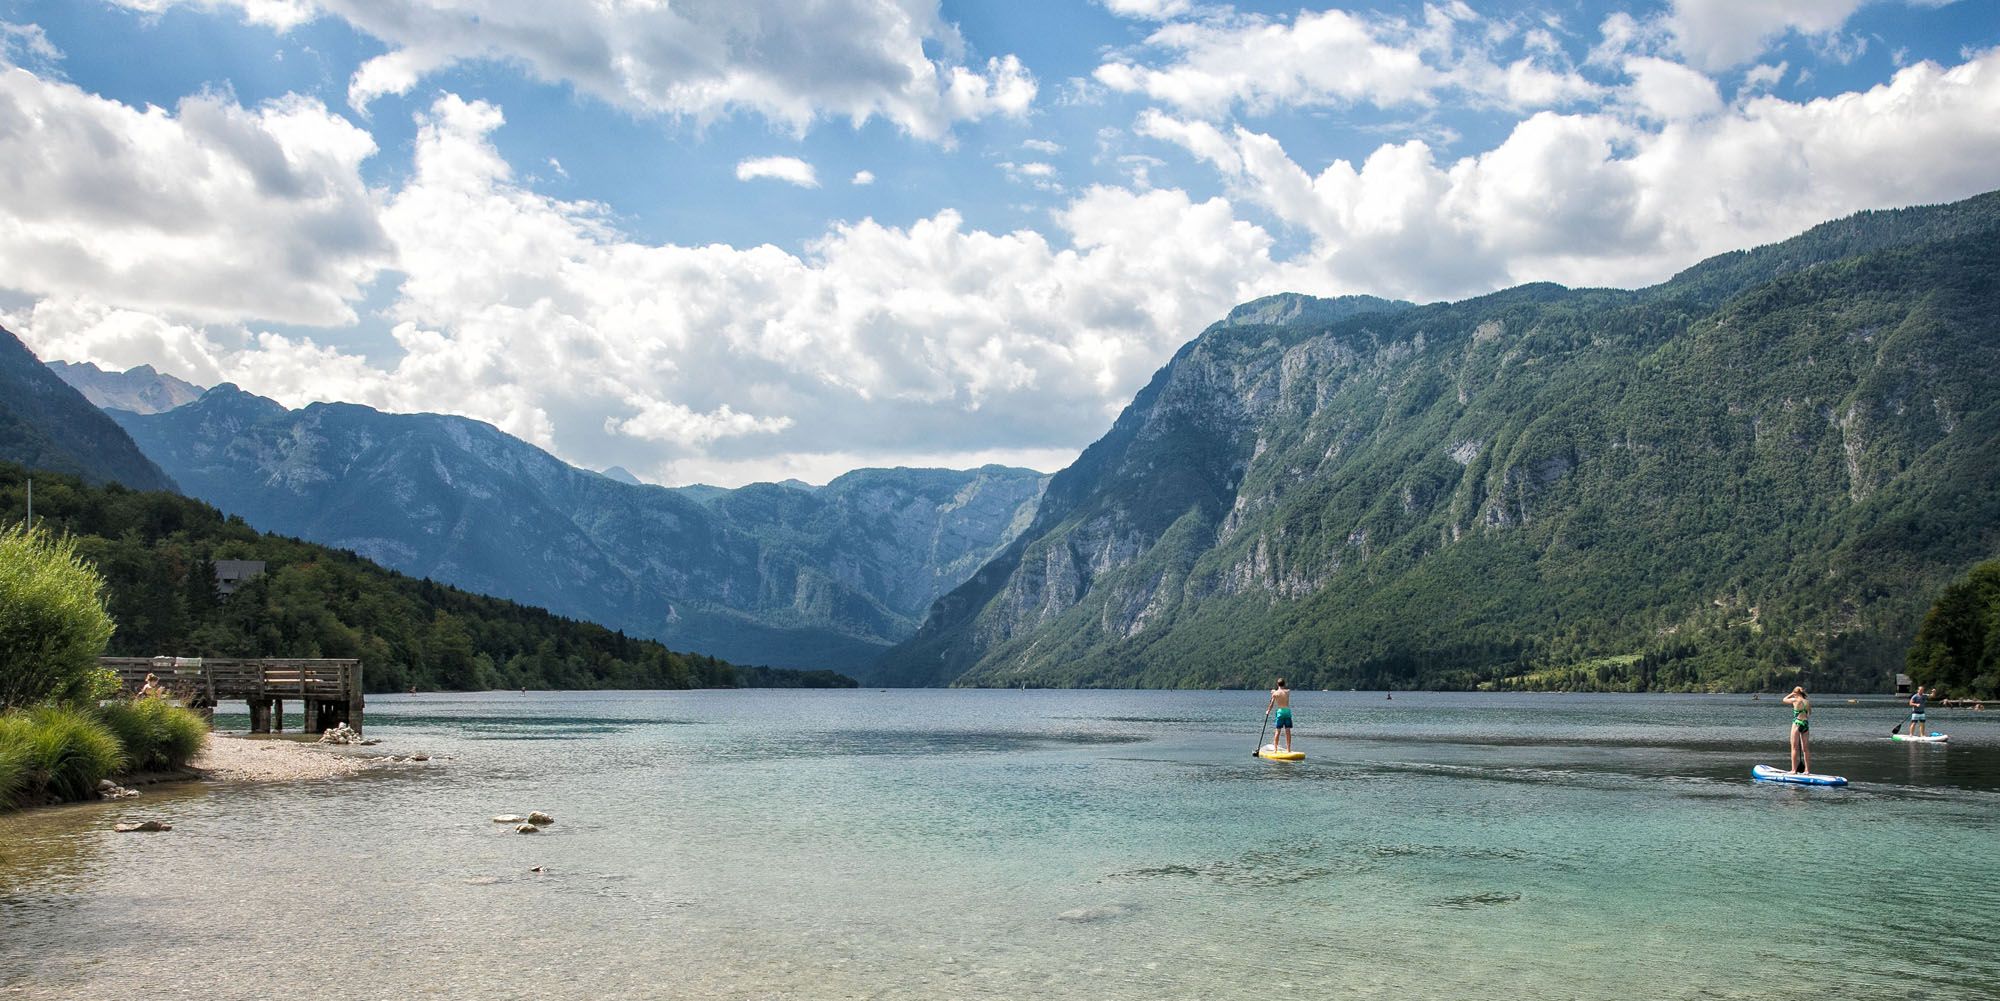 Featured image for “7 Great Things to Do at Lake Bohinj in the Summer”